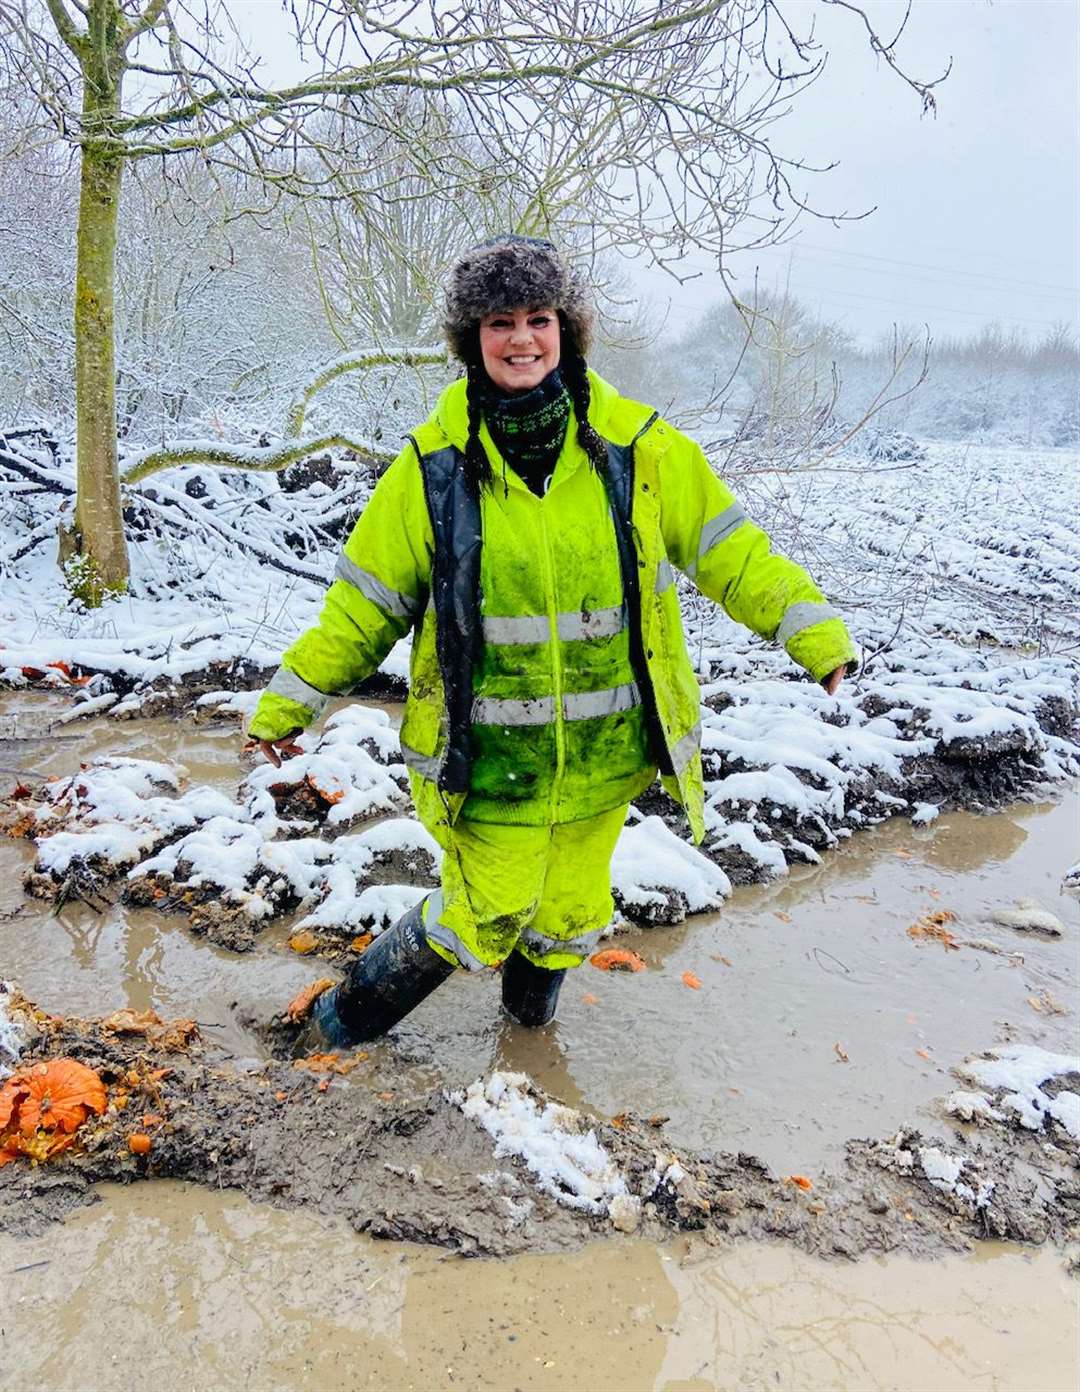 Happy Pants Ranch animal sanctuary founder Amey James in mud when she first took over the 20-acre site in Iwade Road, Bobbing, a year ago